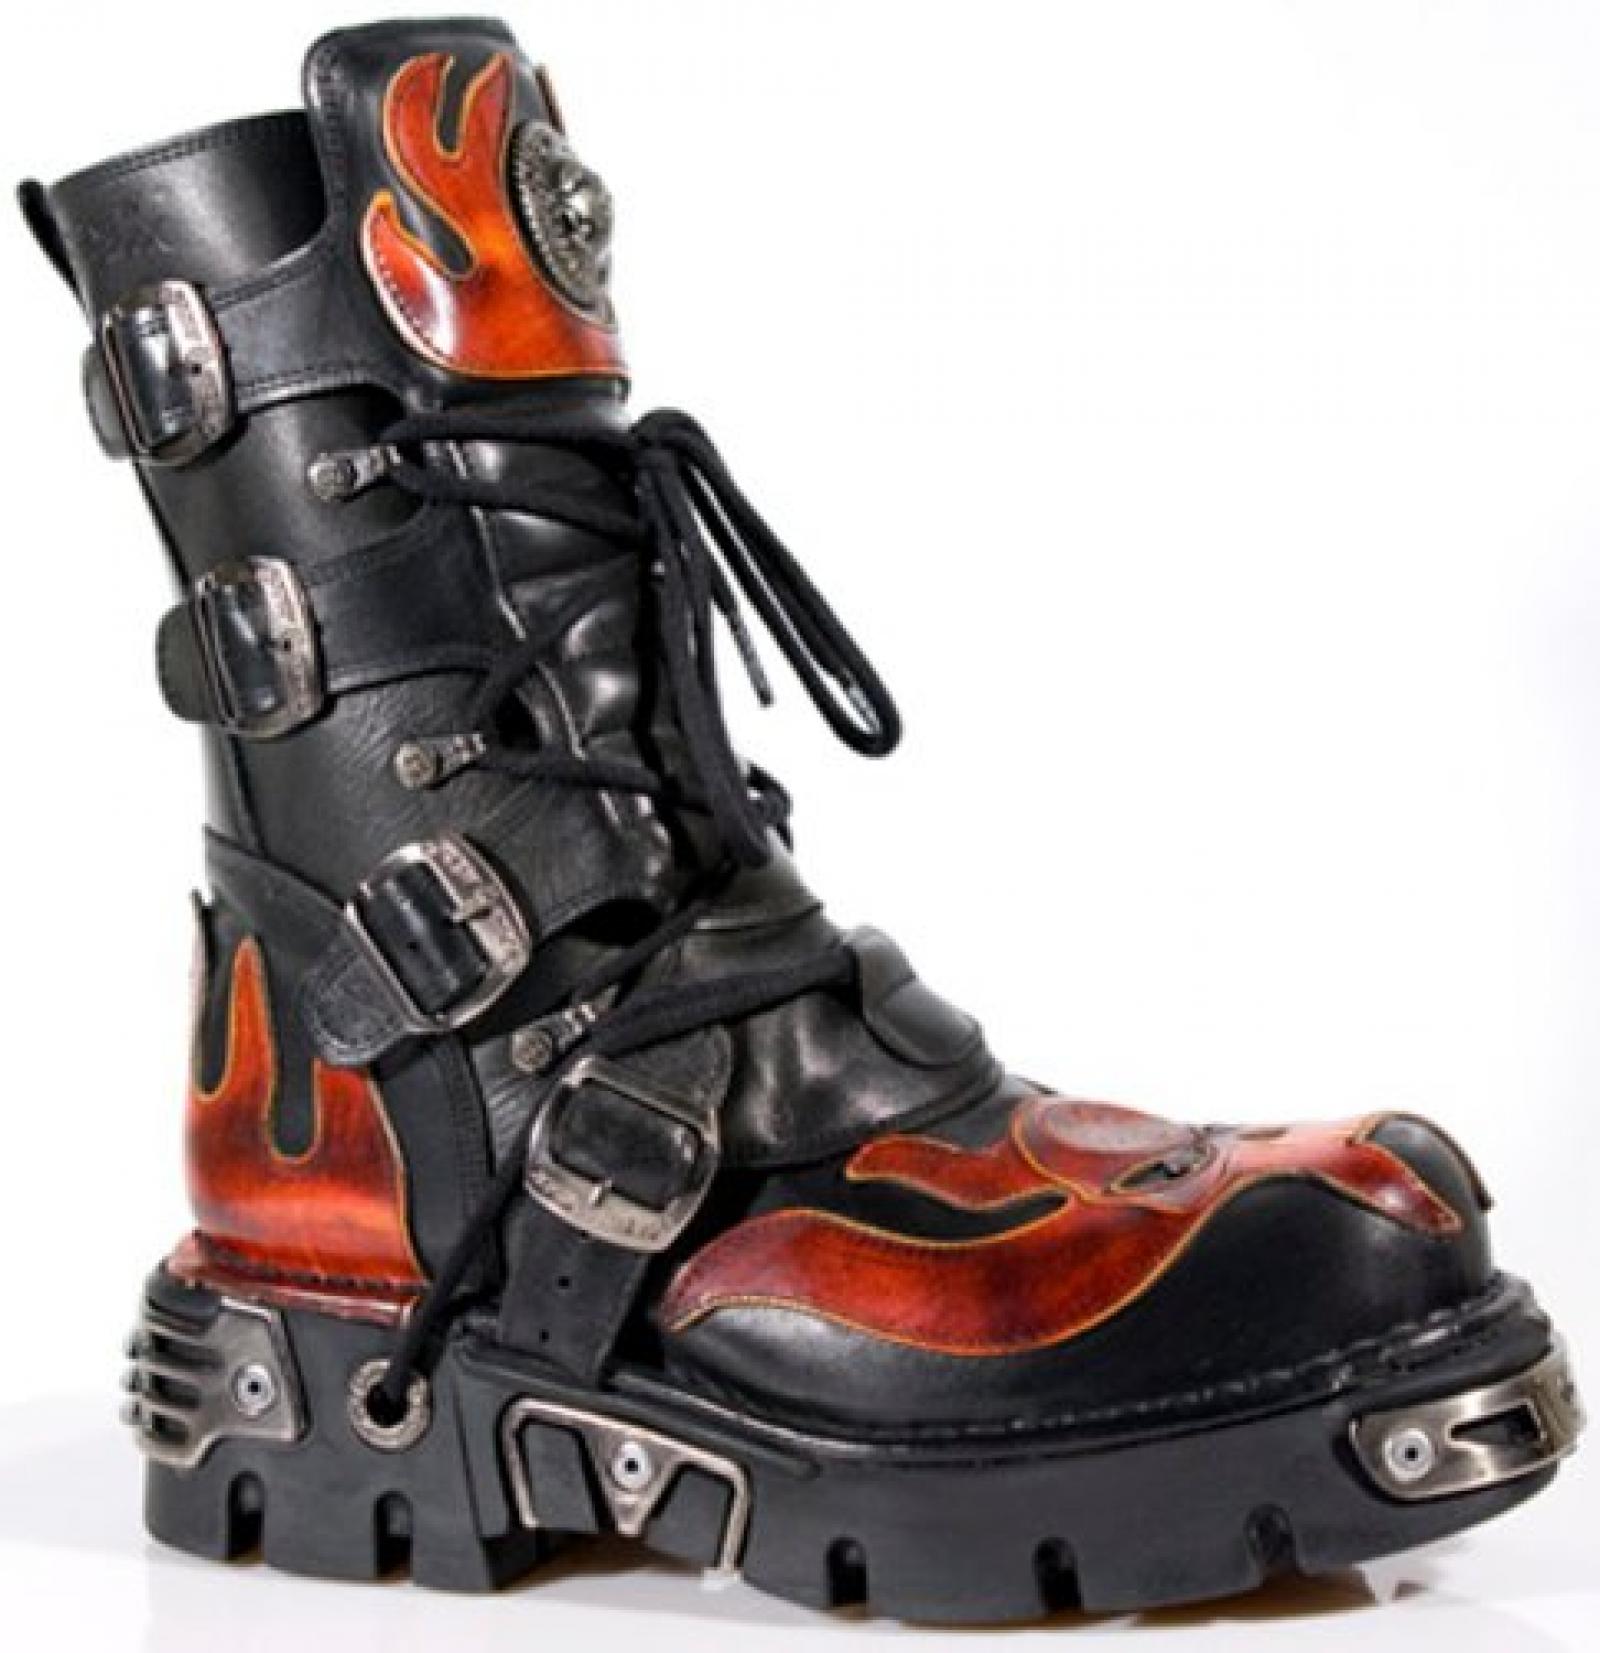 New Rock Boots Unisex Stiefel - Style 107 S1 rot 